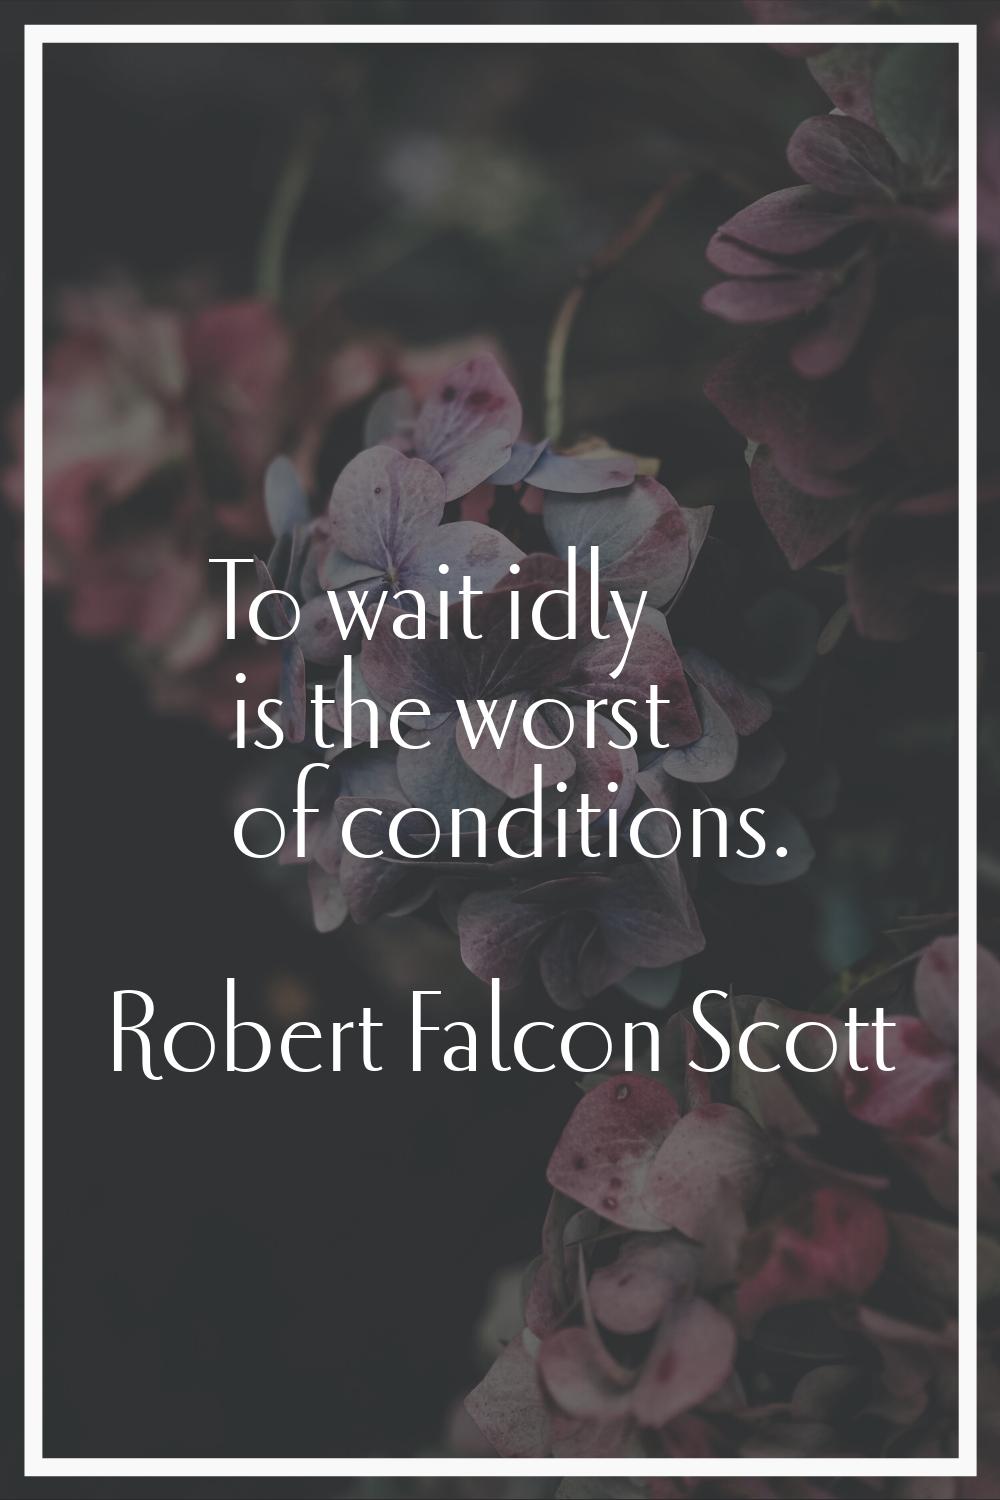 To wait idly is the worst of conditions.